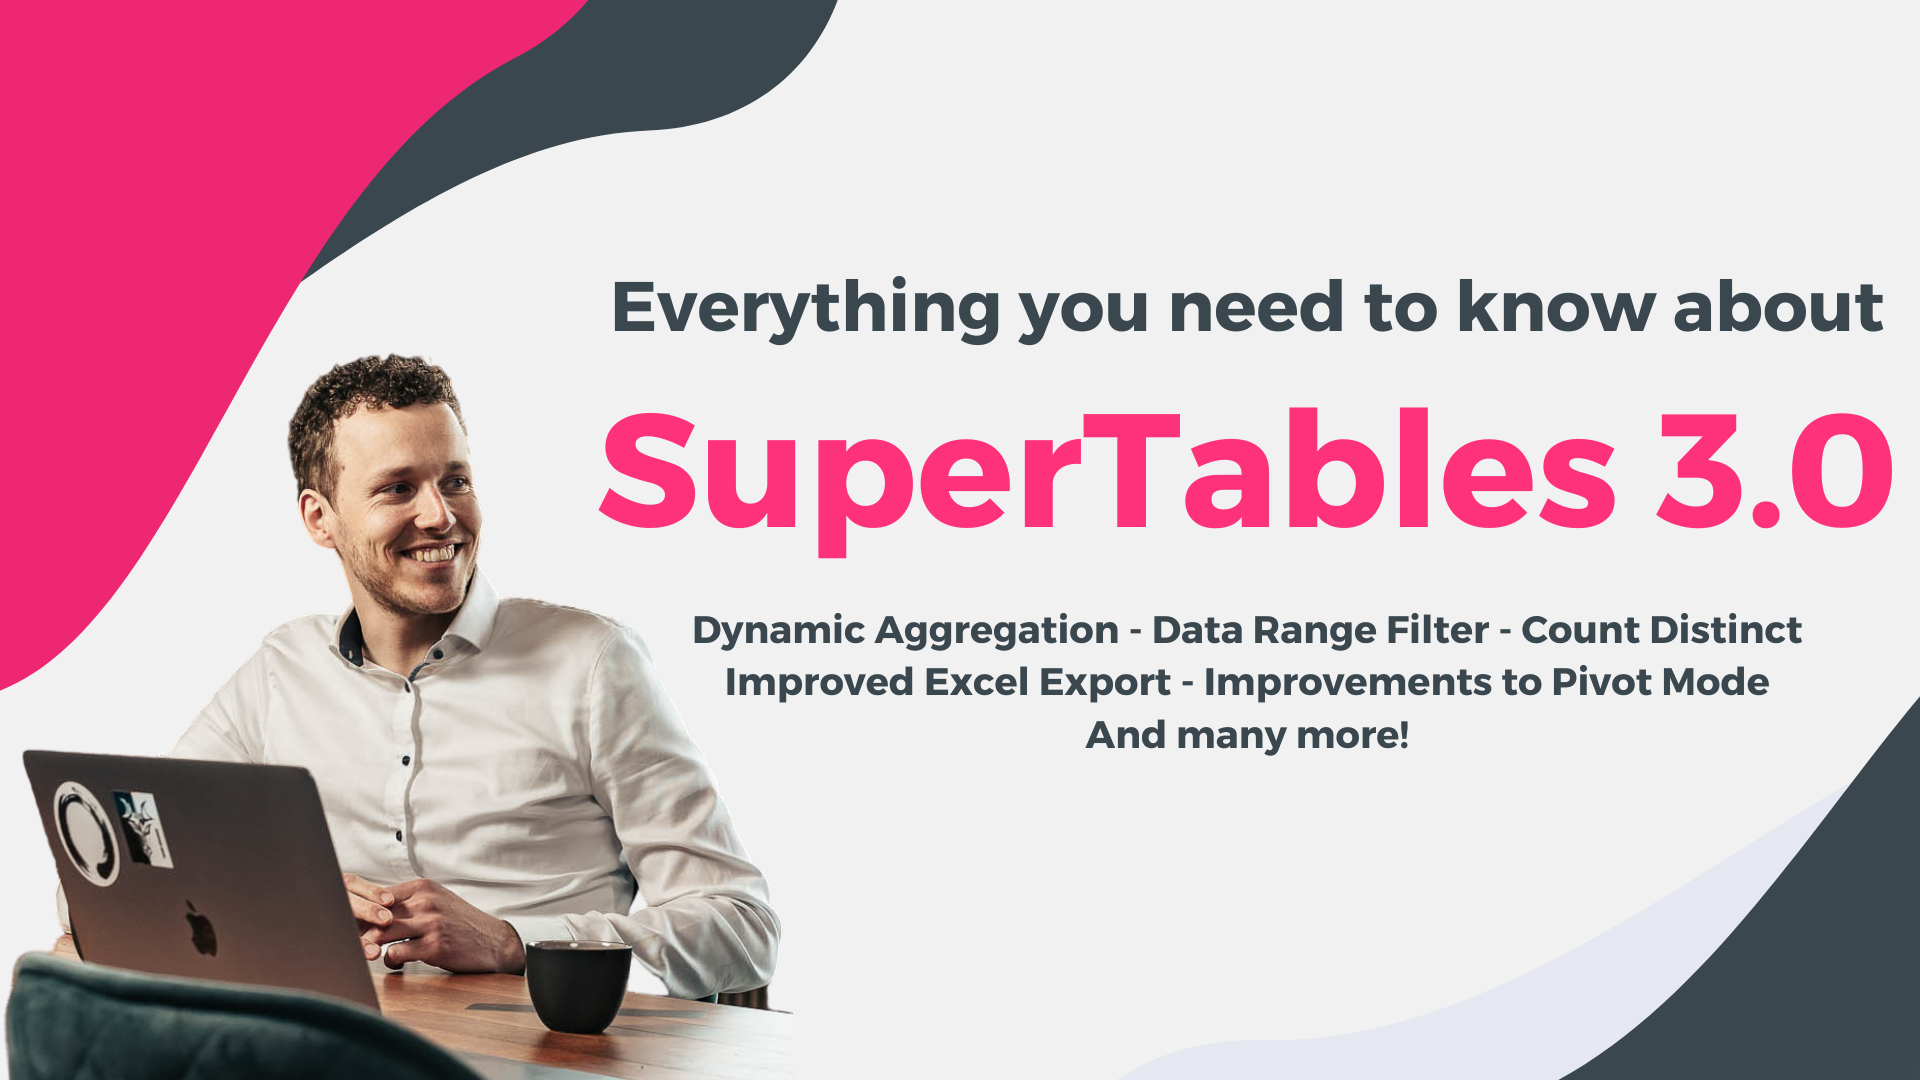 Everything you need to know about SuperTables 3.0